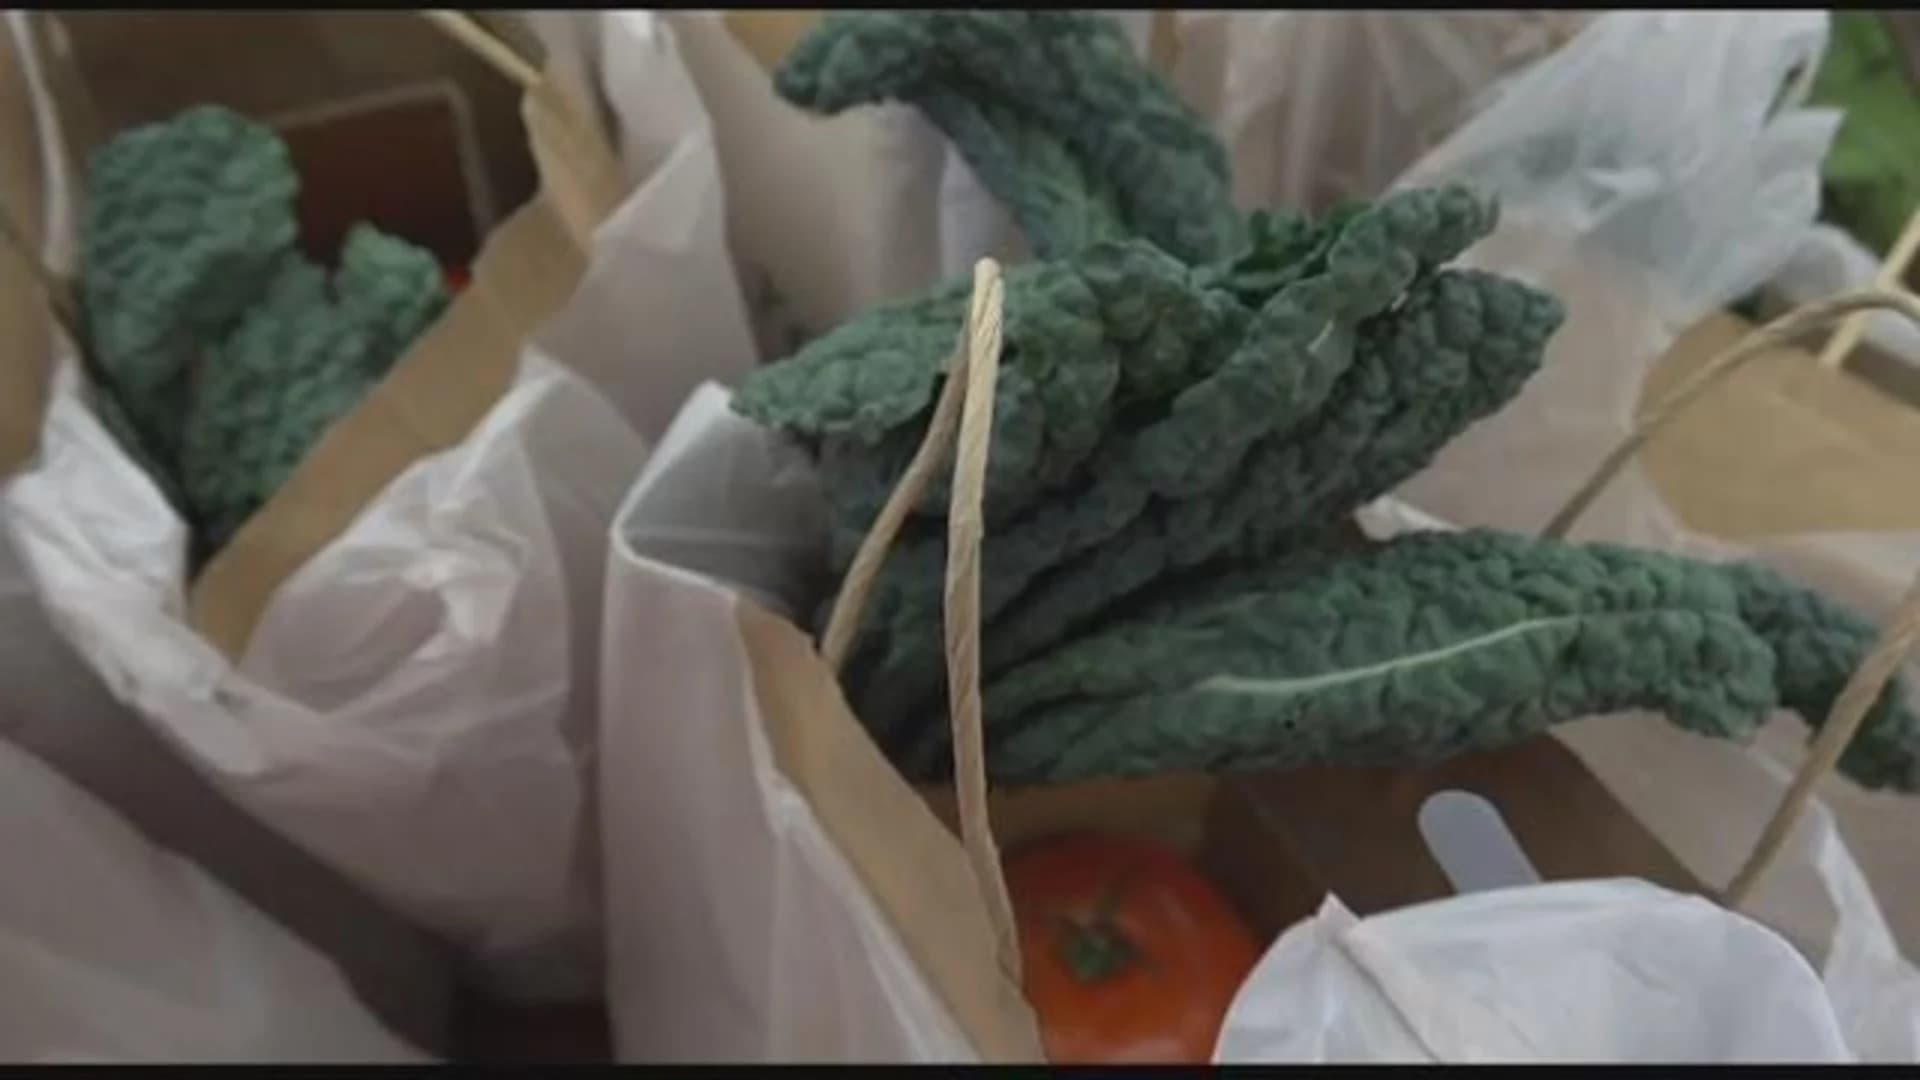 Initiative offers fresh produce to seniors